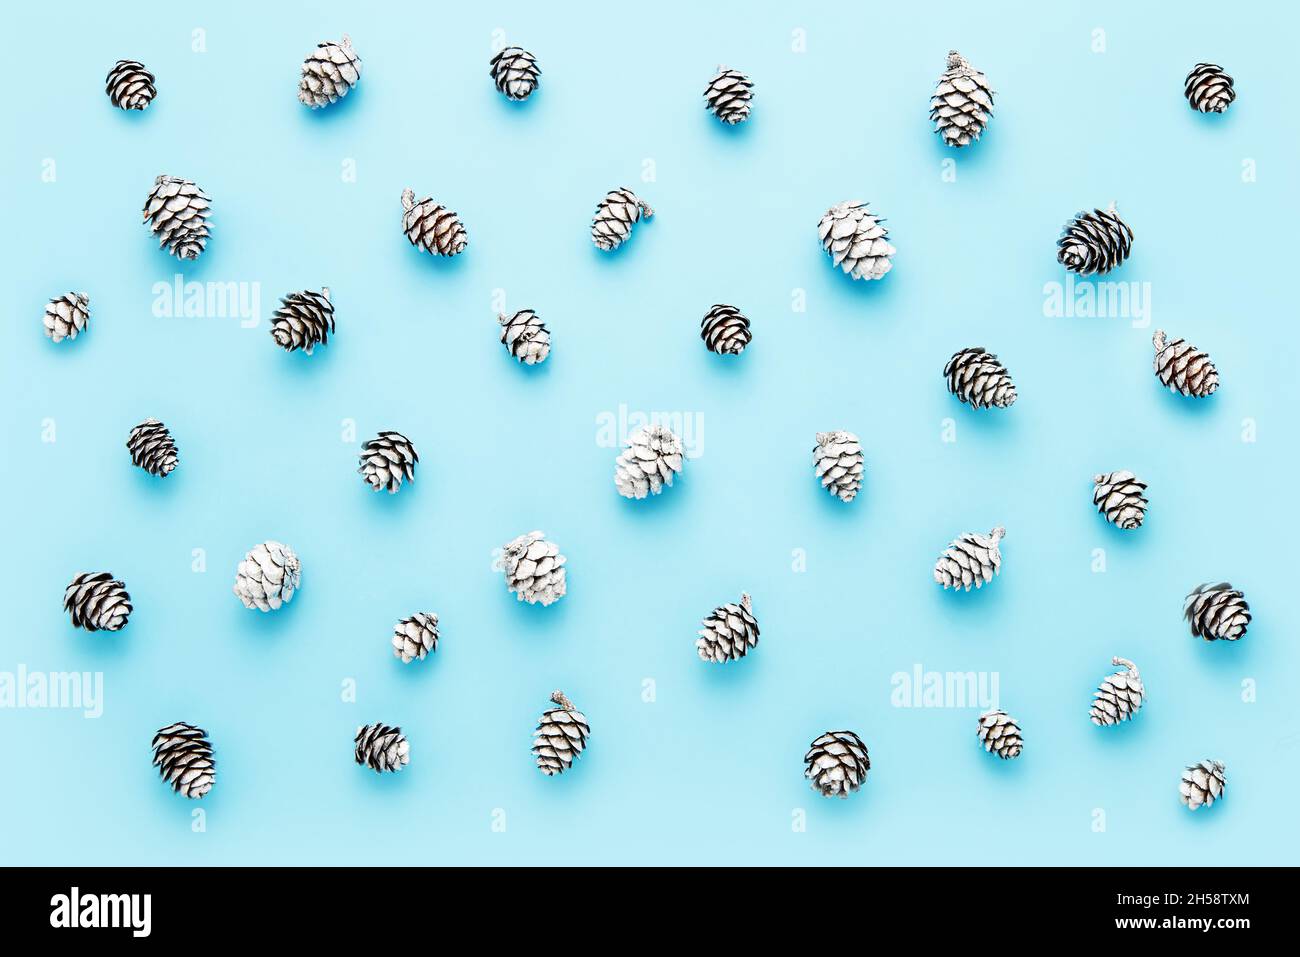 Abstract background. Small silver cones on a light blue background. Top view Stock Photo